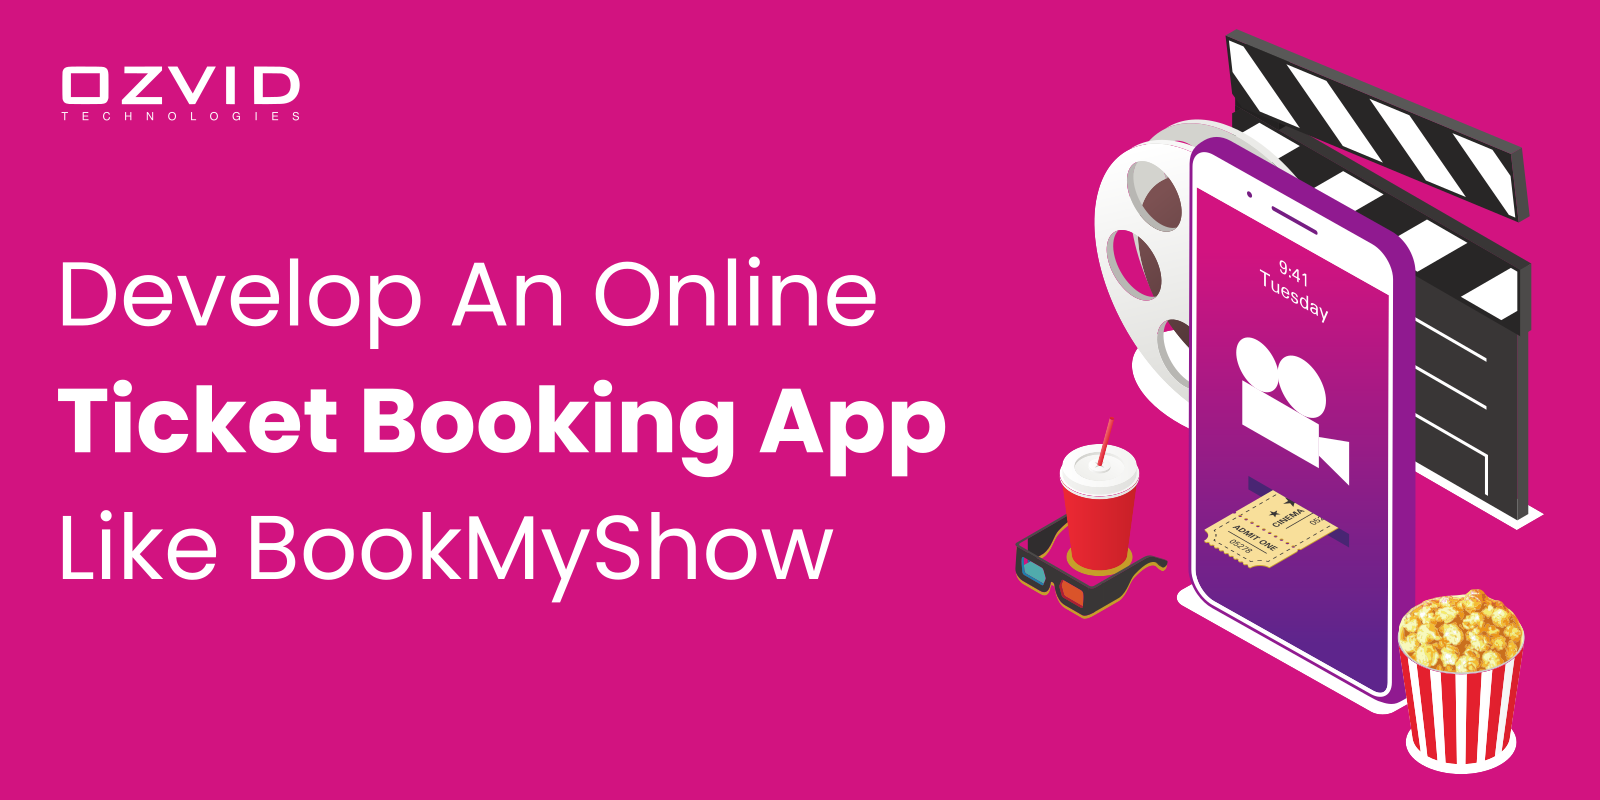 How to Develop an Online Ticket Booking App Like BookMyShow?